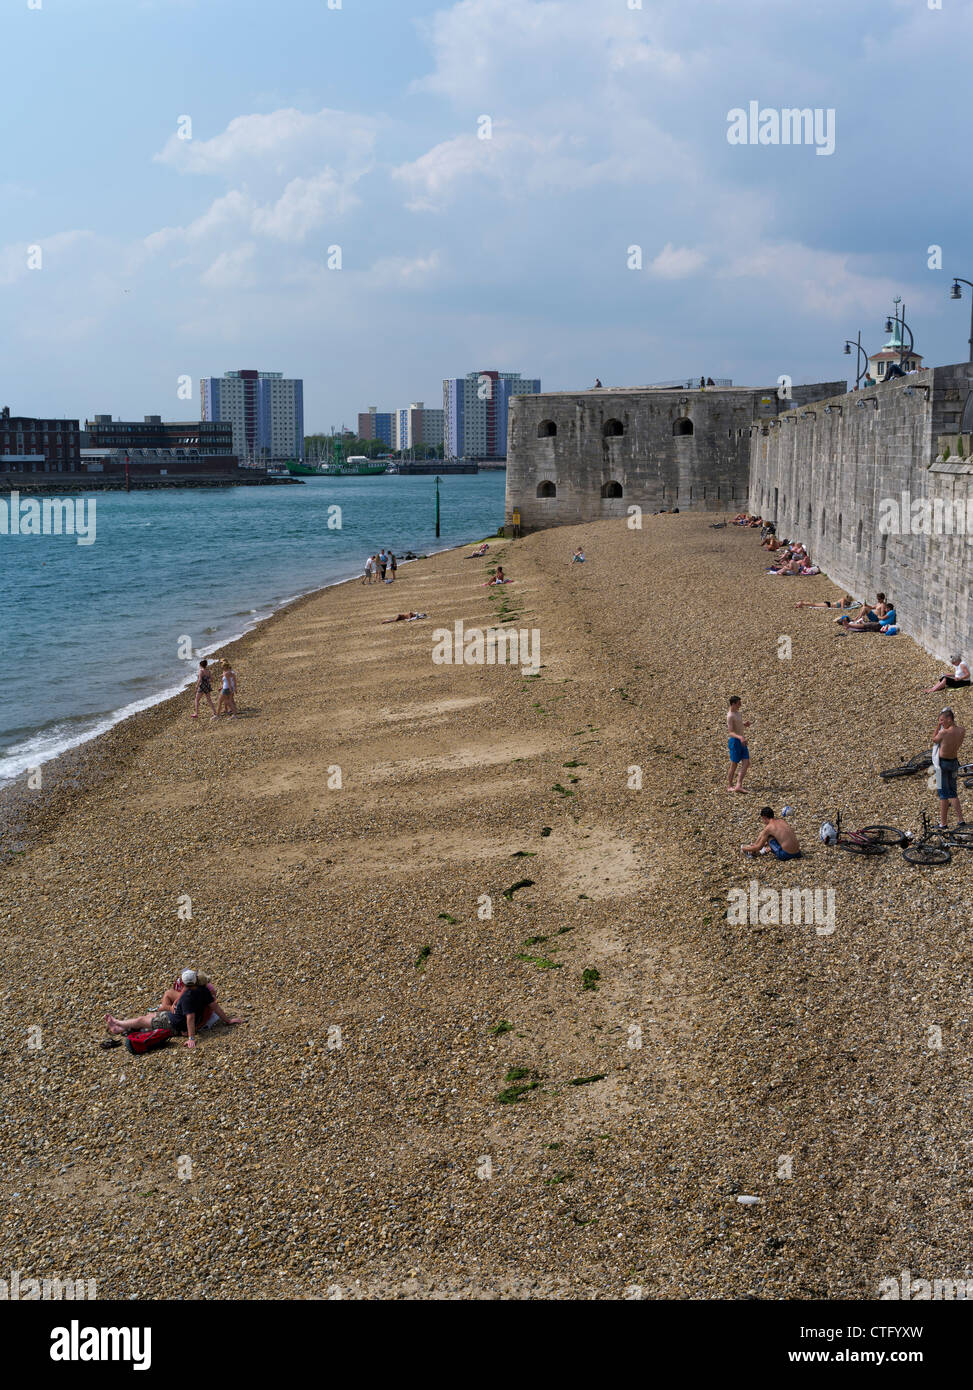 dh Old Portsmouth PORTSMOUTH HAMPSHIRE People on Portsmouth Harbour beach and sea wall fortifications Stock Photo